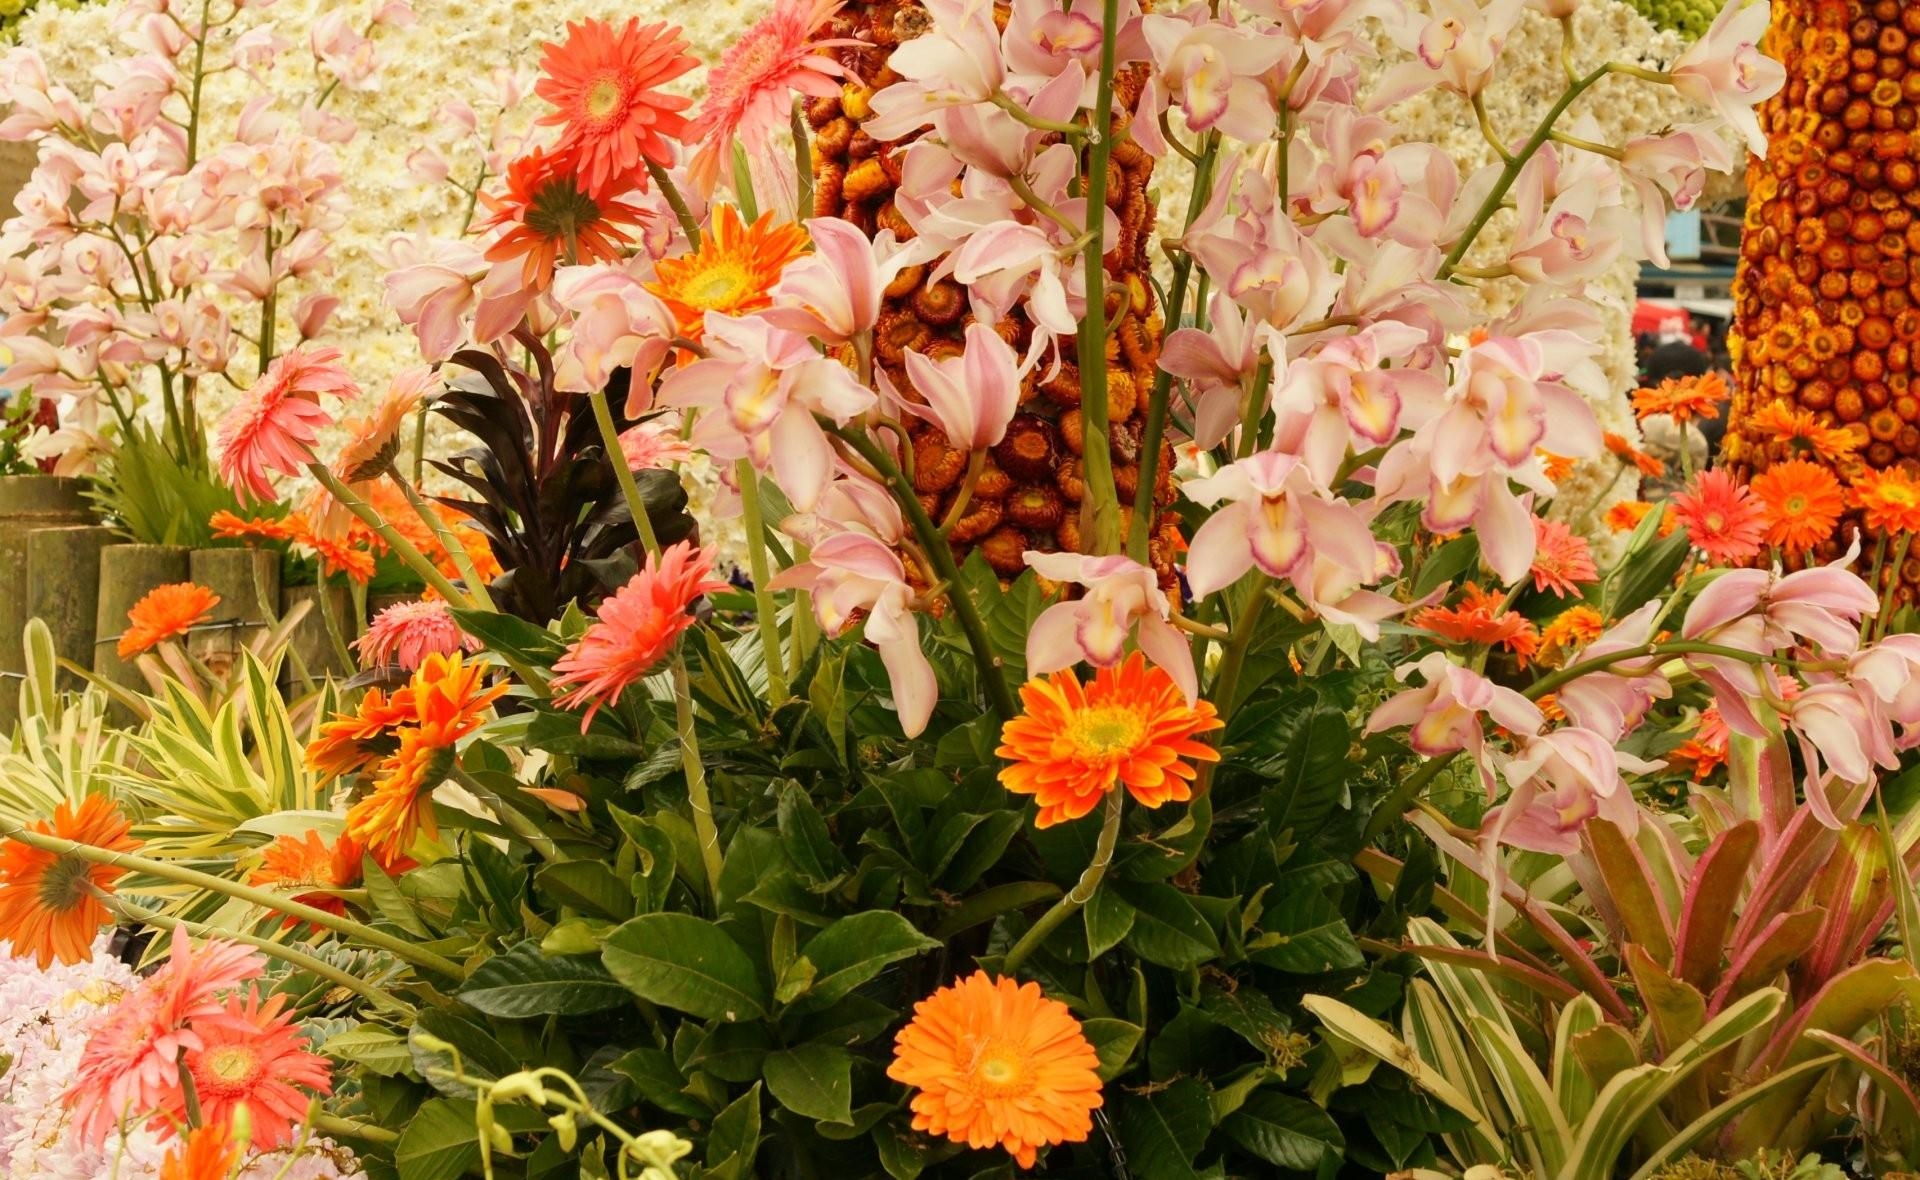 flowers, gerberas, flower bed, flowerbed, composition, handsomely, it's beautiful, orchid cellphone